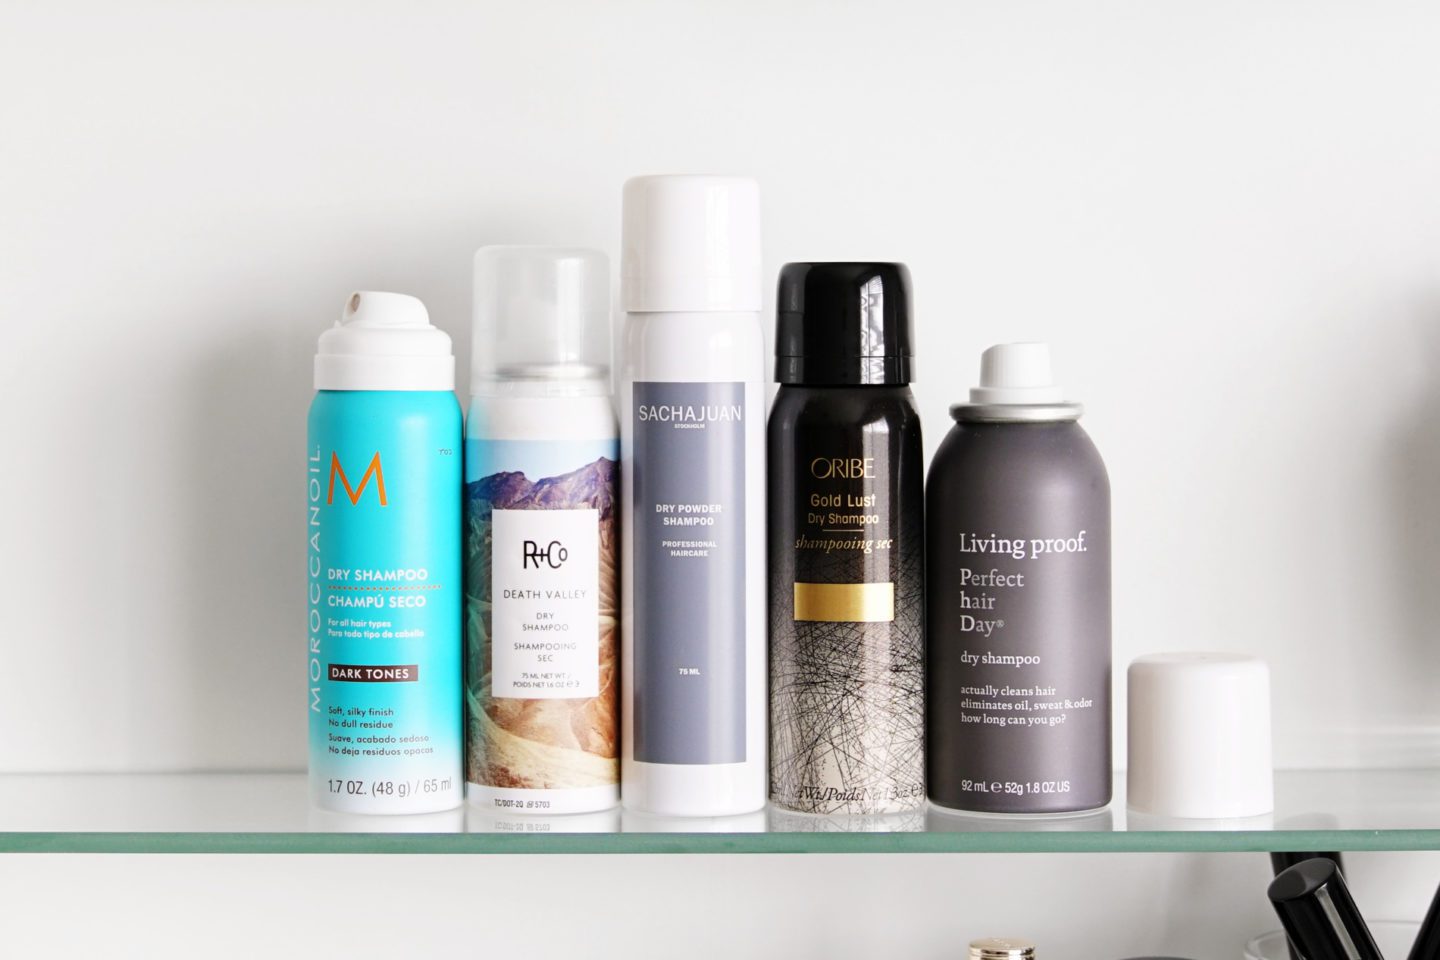 Best Dry Shampoo for Dark Hair, Moroccanoil for Dark Tones, R+Co Death Valley, Sachajuan, Oribe and Living Proof